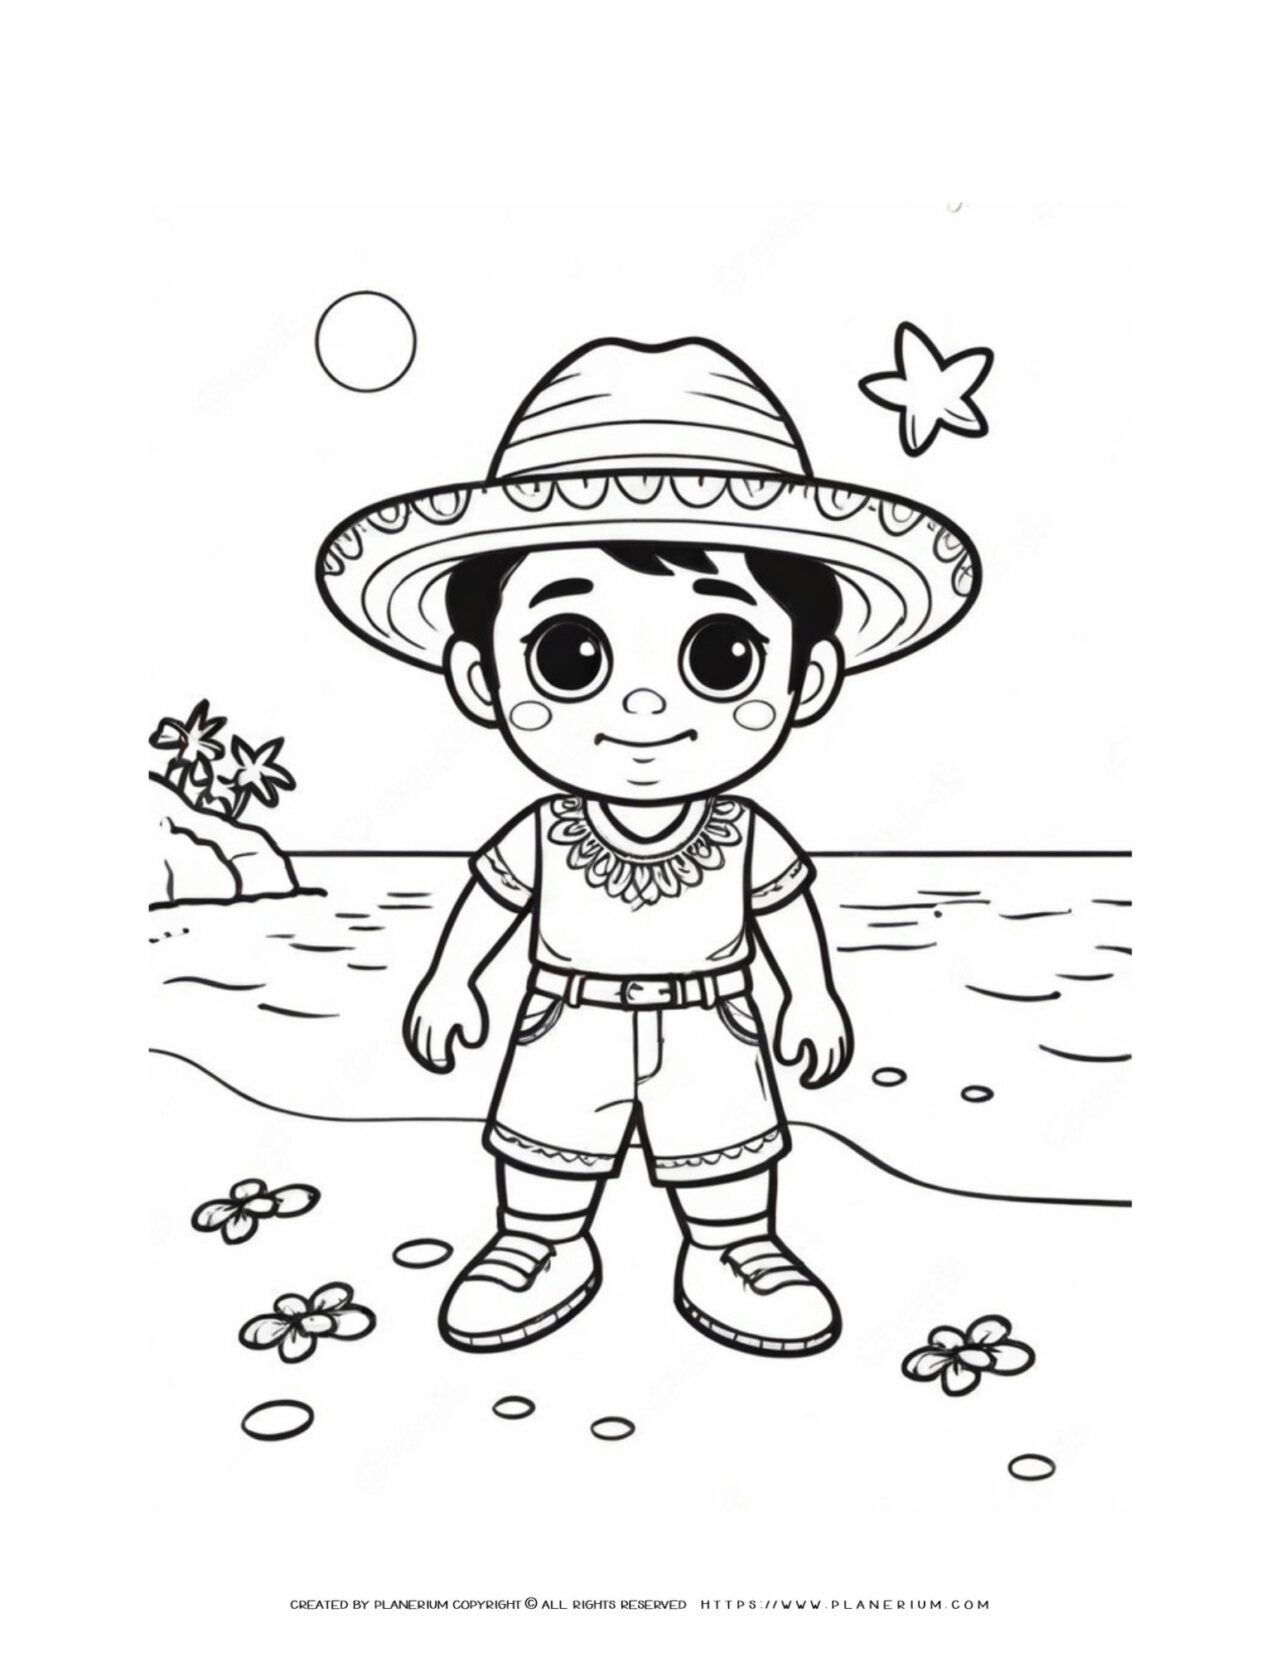 mexican-little-boy-with-summer-clothes-sombrero-hat-standing-on-the-beach-coloring-page-for-kids